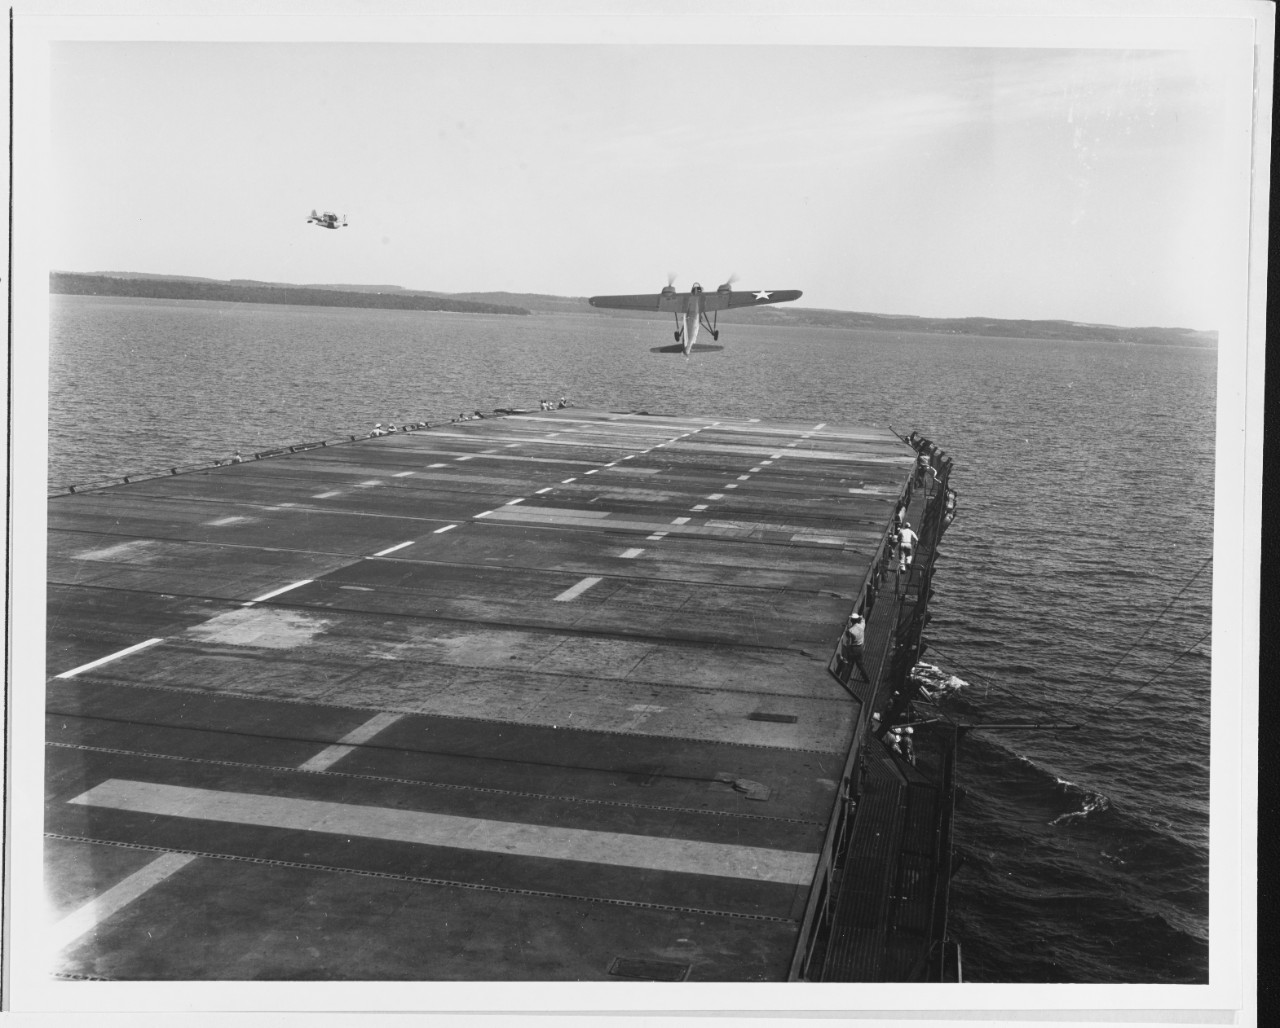 Launching a TDN-1 drone while steaming off Traverse City, Michigan, during flight tests on 10 August 1943. This plane has assumed an excessive nose-up attitude and is probably about to stall. Note the J2F amphibian flying off the ship's port bow, possibly acting as a drone control aircraft.